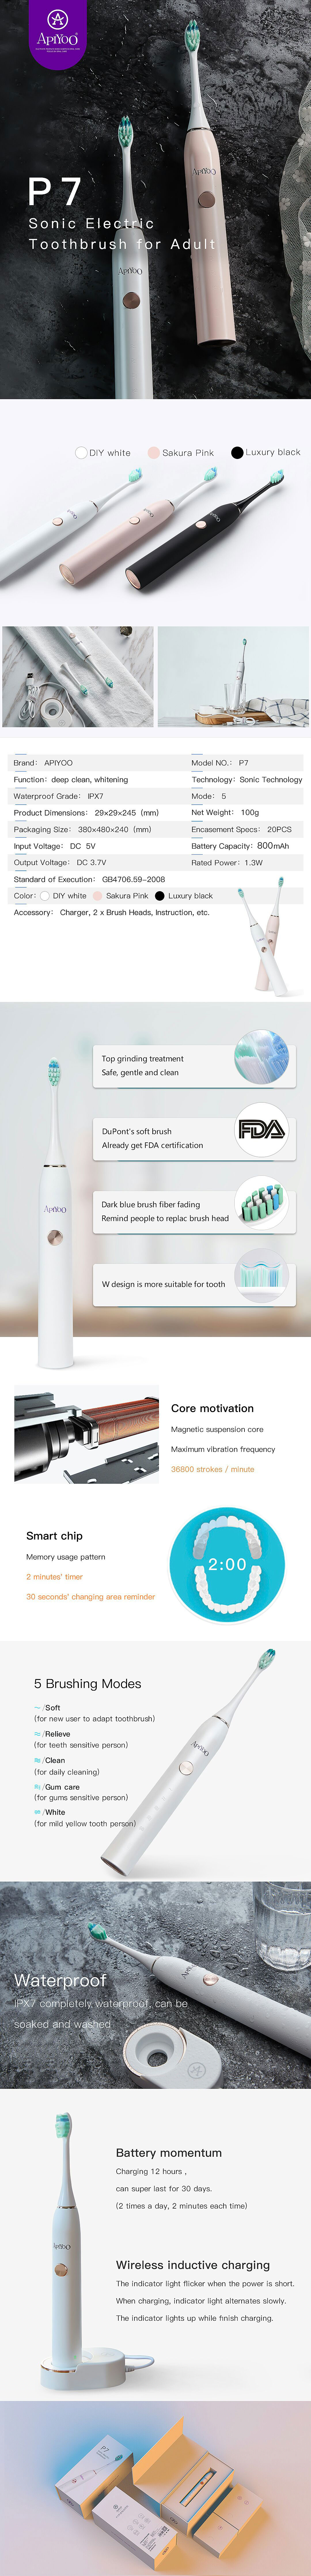 APIYOO P7 Sonic Electric Toothbrush Five Cleaning Modes Time Reminder Electric Toothbrush IPX7 Waterproof Long Battery Life Electric Toothbrush